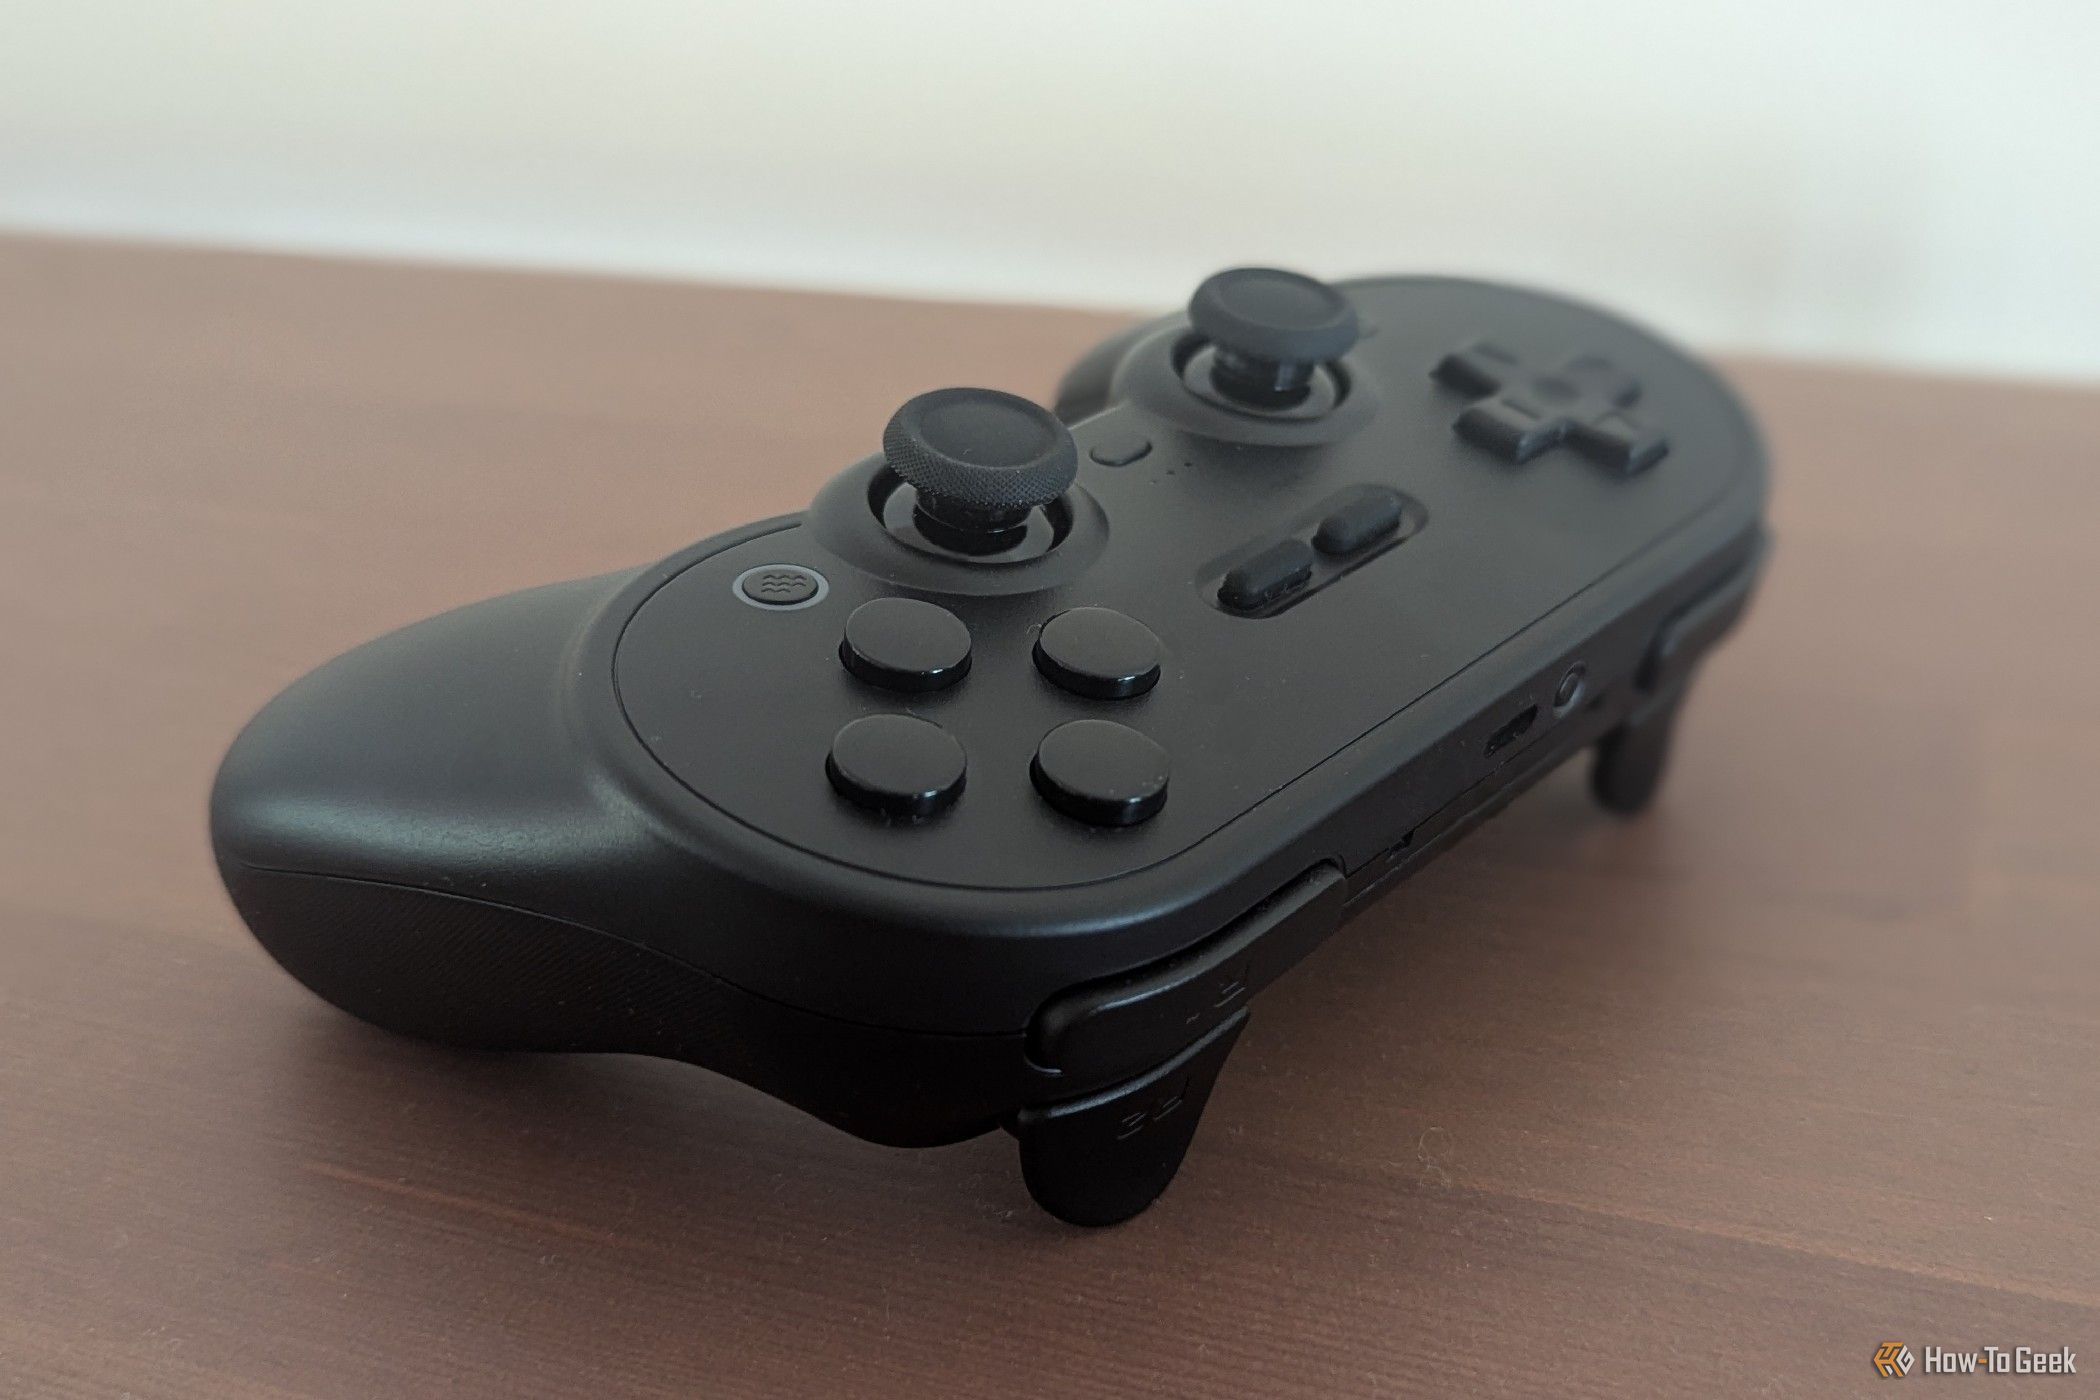 Shoulder buttons on the 8BitDo Pro 2 controller.